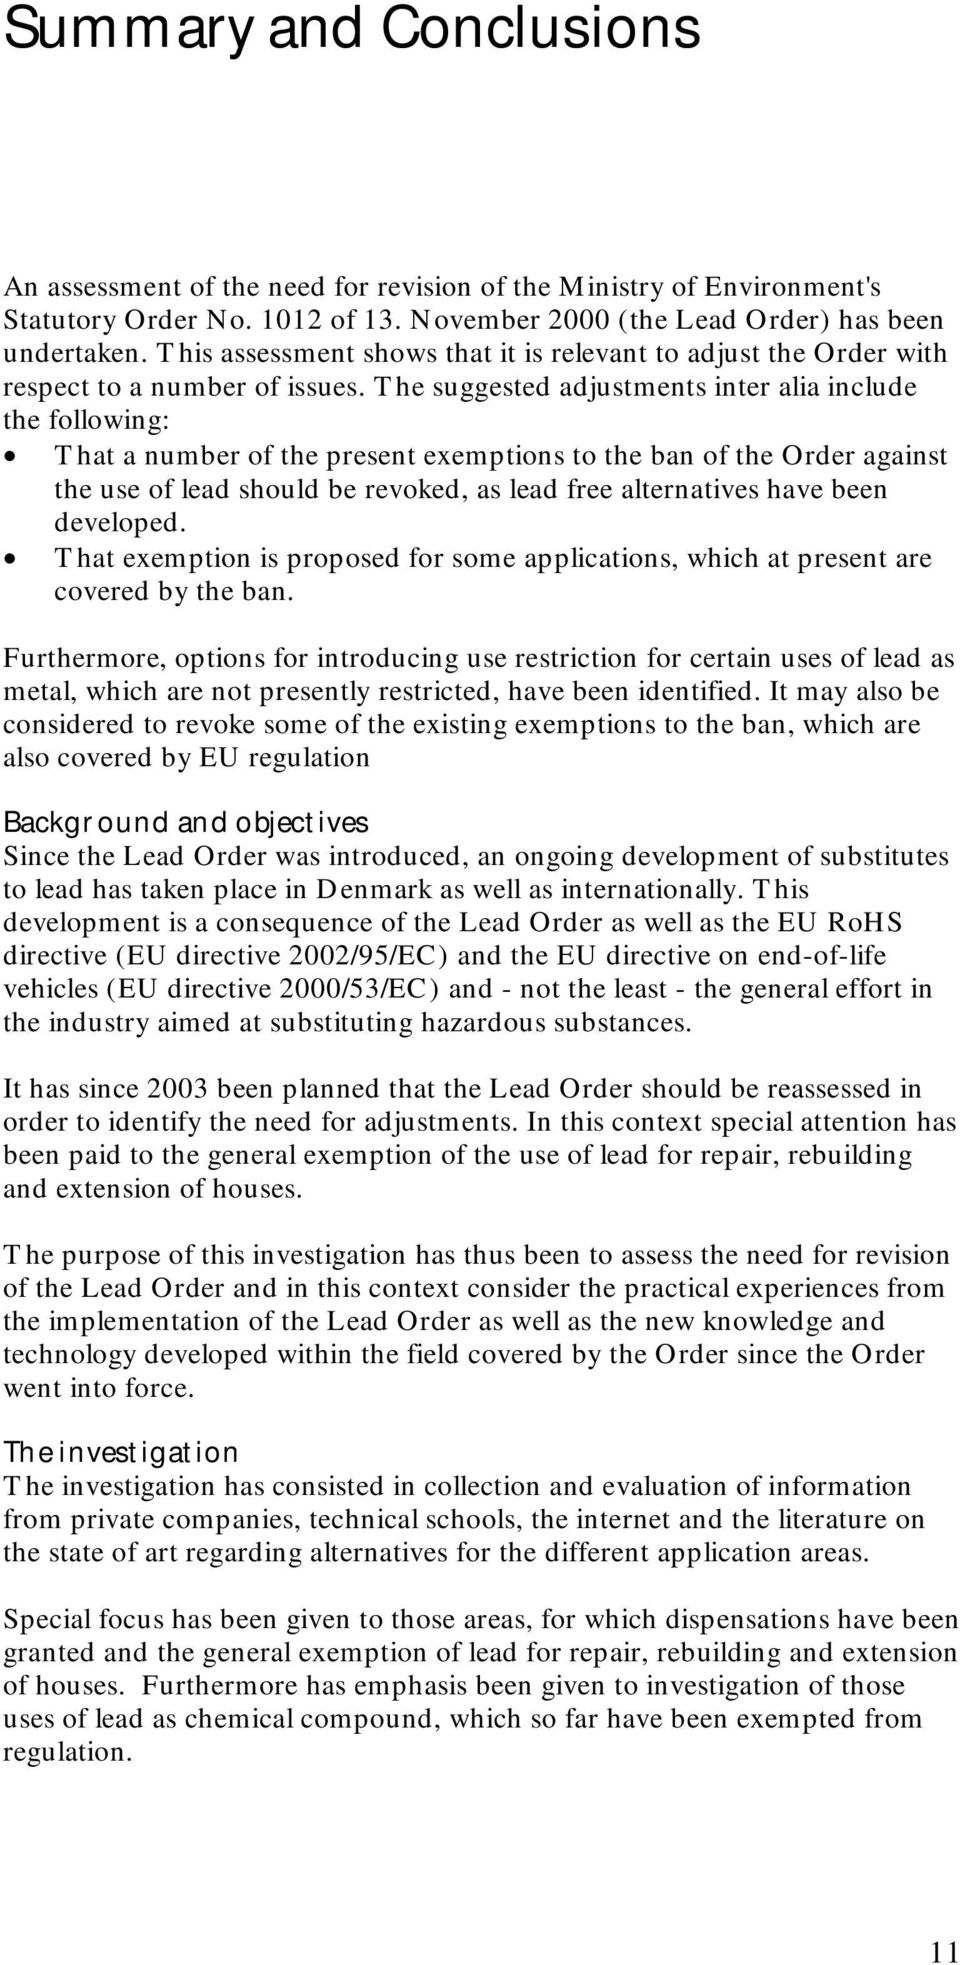 The suggested adjustments inter alia include the following: That a number of the present exemptions to the ban of the Order against the use of lead should be revoked, as lead free alternatives have